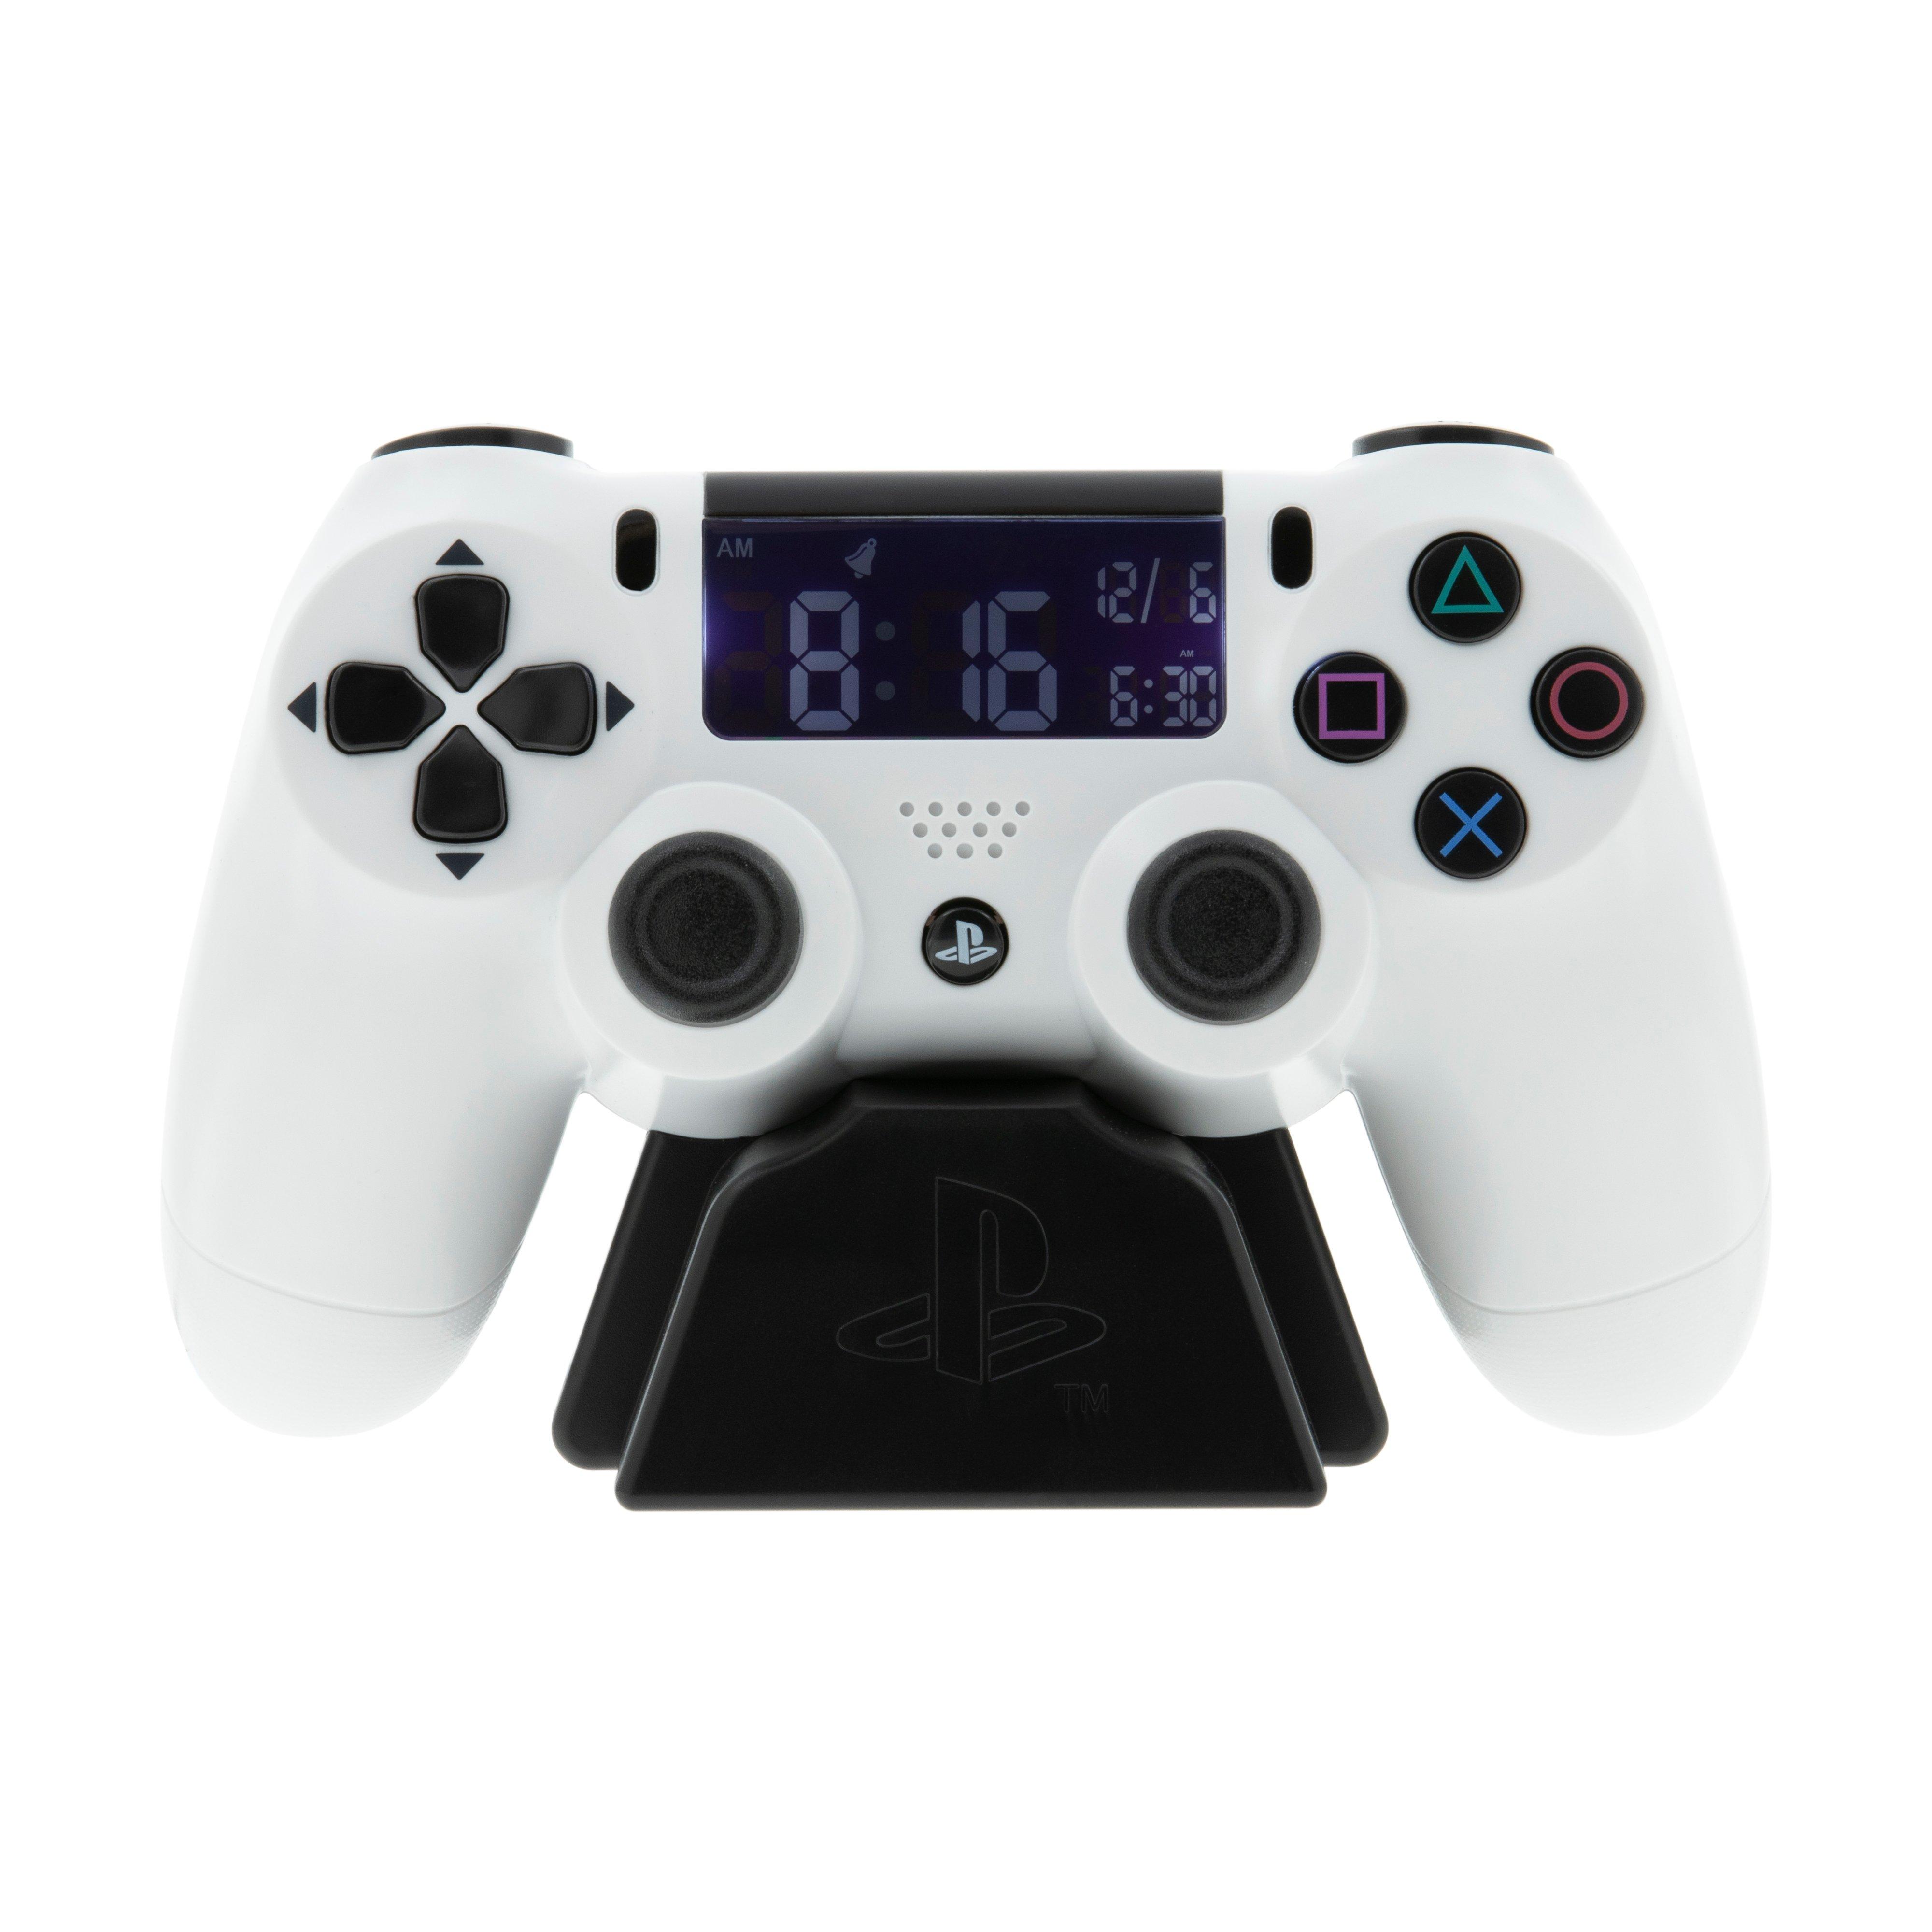 Playstation Digital Alarm Clock USB LCD Electronic PS4 Controller Novelty Gift 